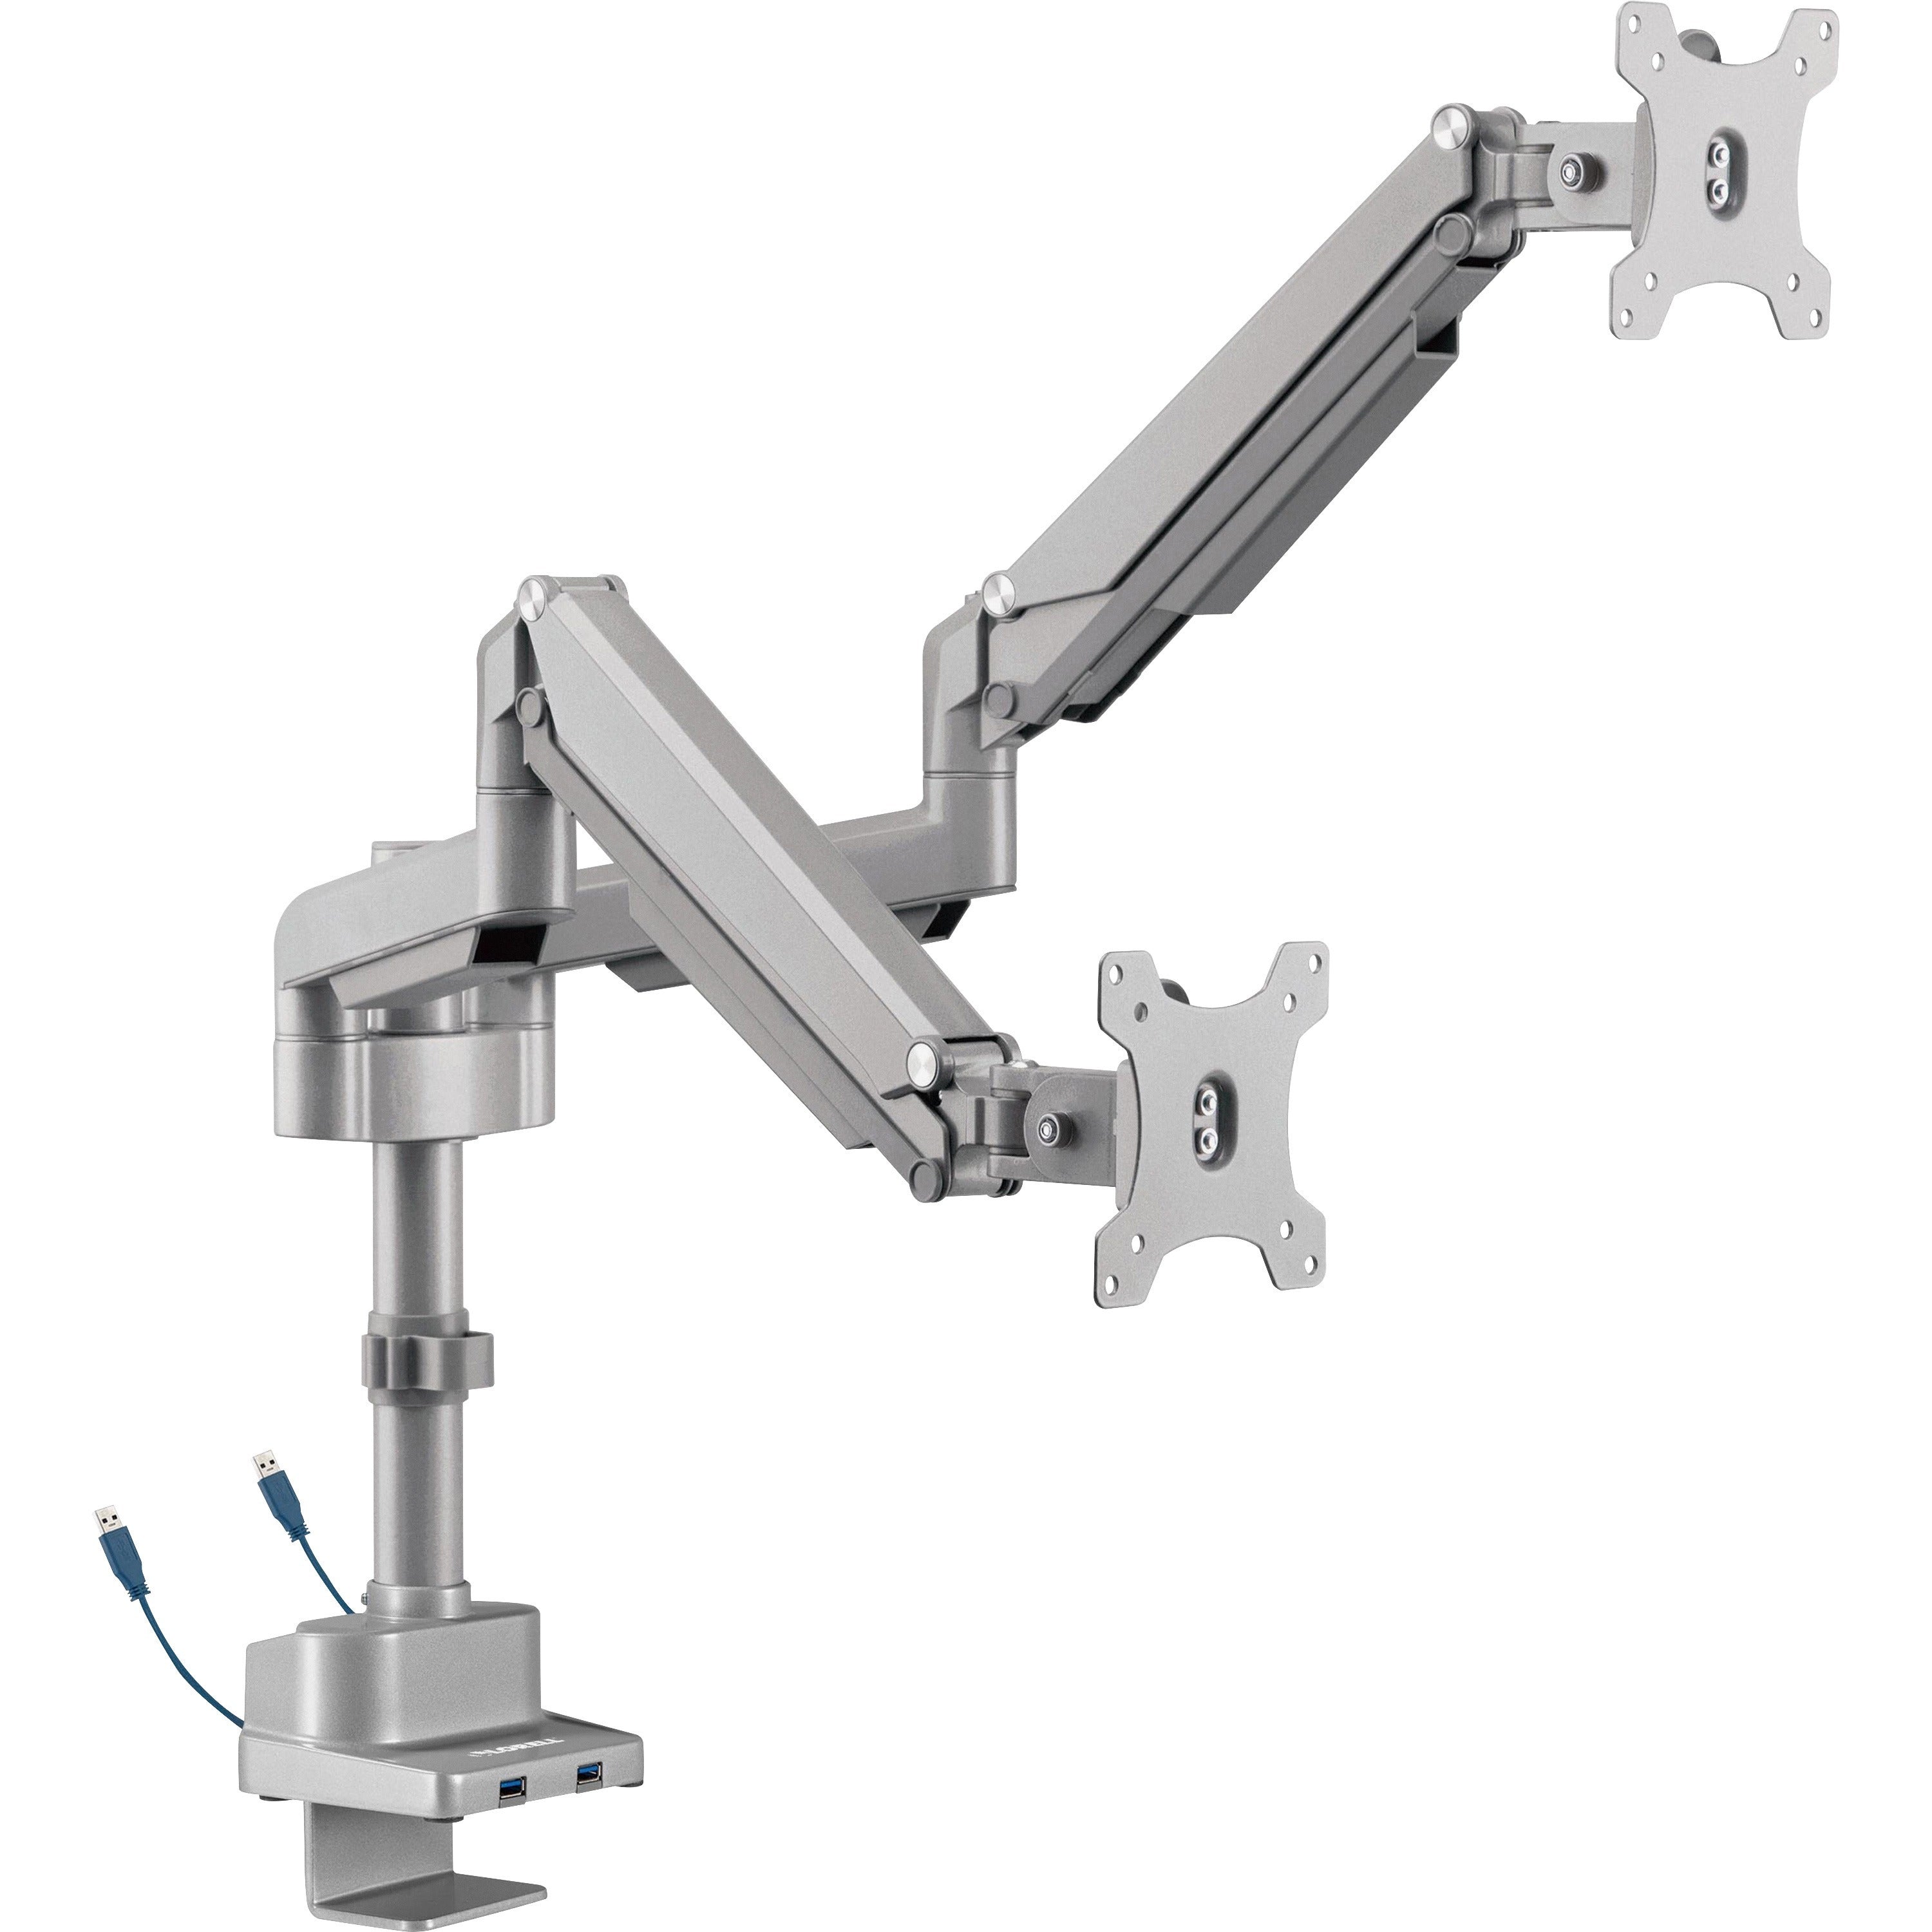 lorell-mounting-arm-for-monitor-gray-height-adjustable-2-displays-supported-1980-lb-load-capacity-75-x-75-100-x-100-1-each_llr99803 - 1